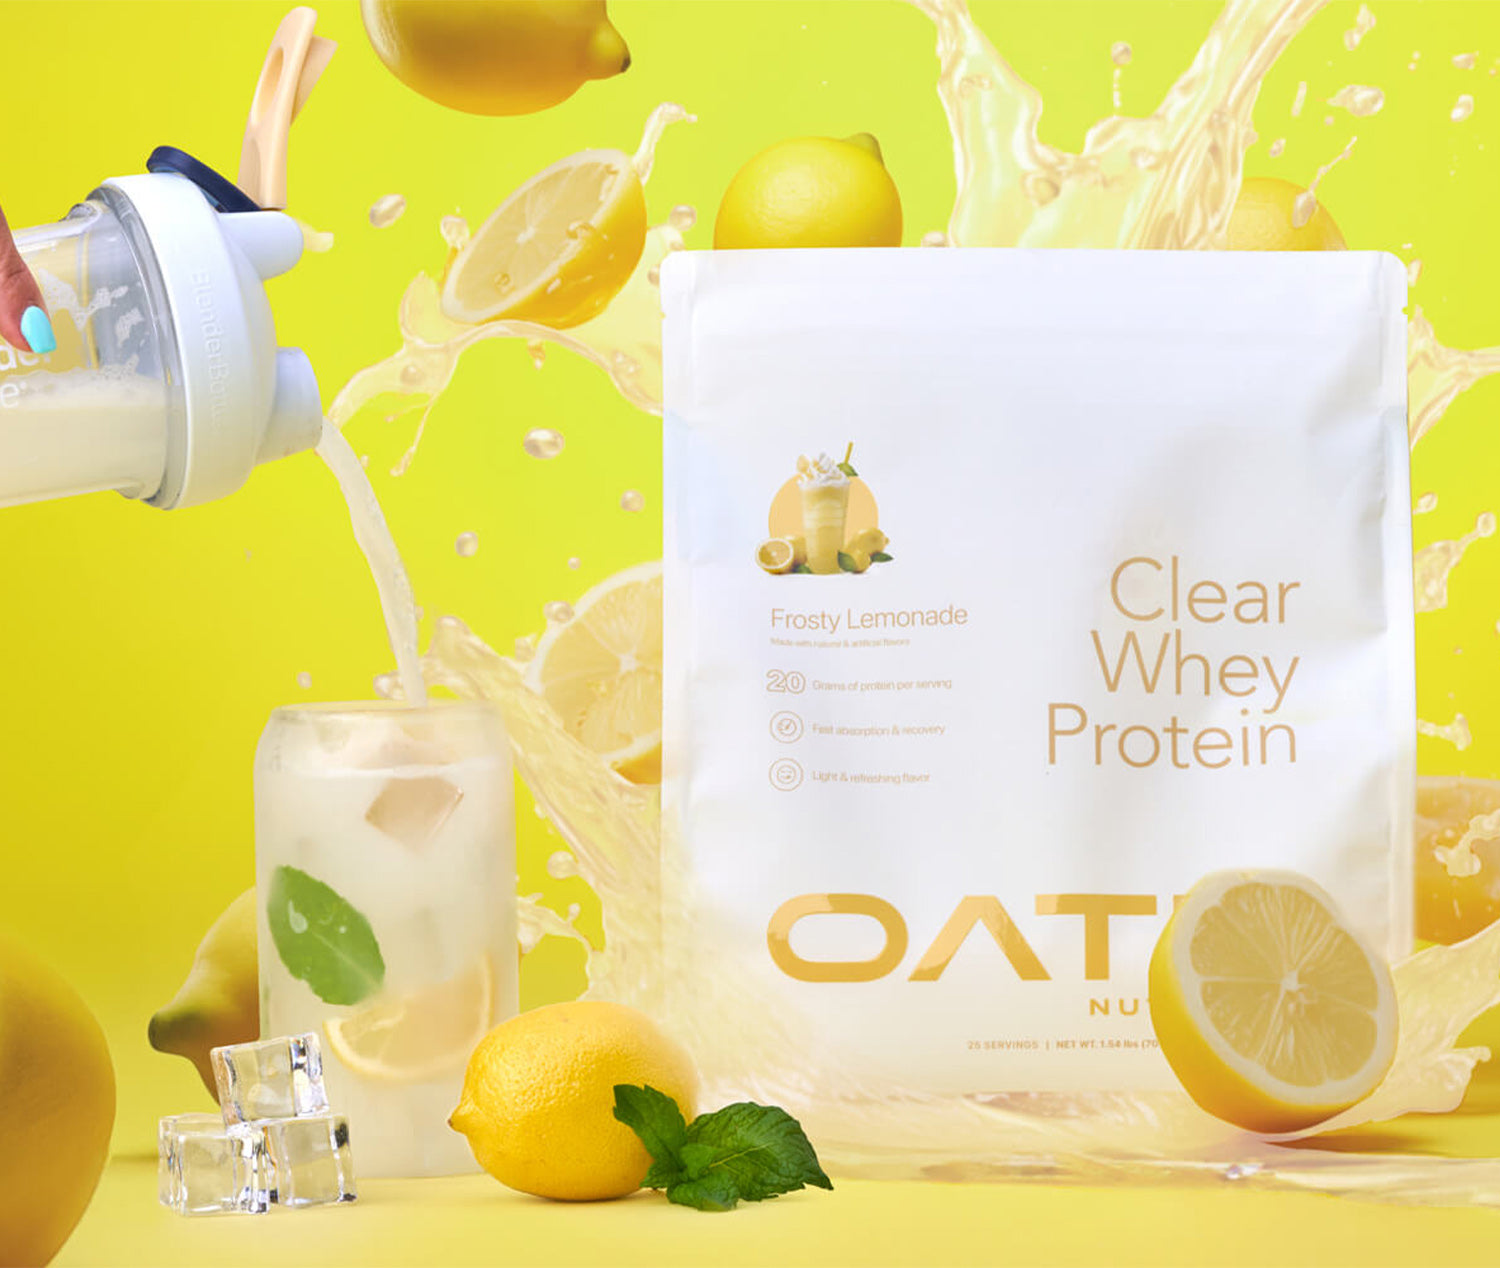 Oath Clear Whey Protein - Frosty Lemonade bag with lemons and lemon protein bursting in the background. A BlenderBottle protein shaker pours clear whey into a glass.